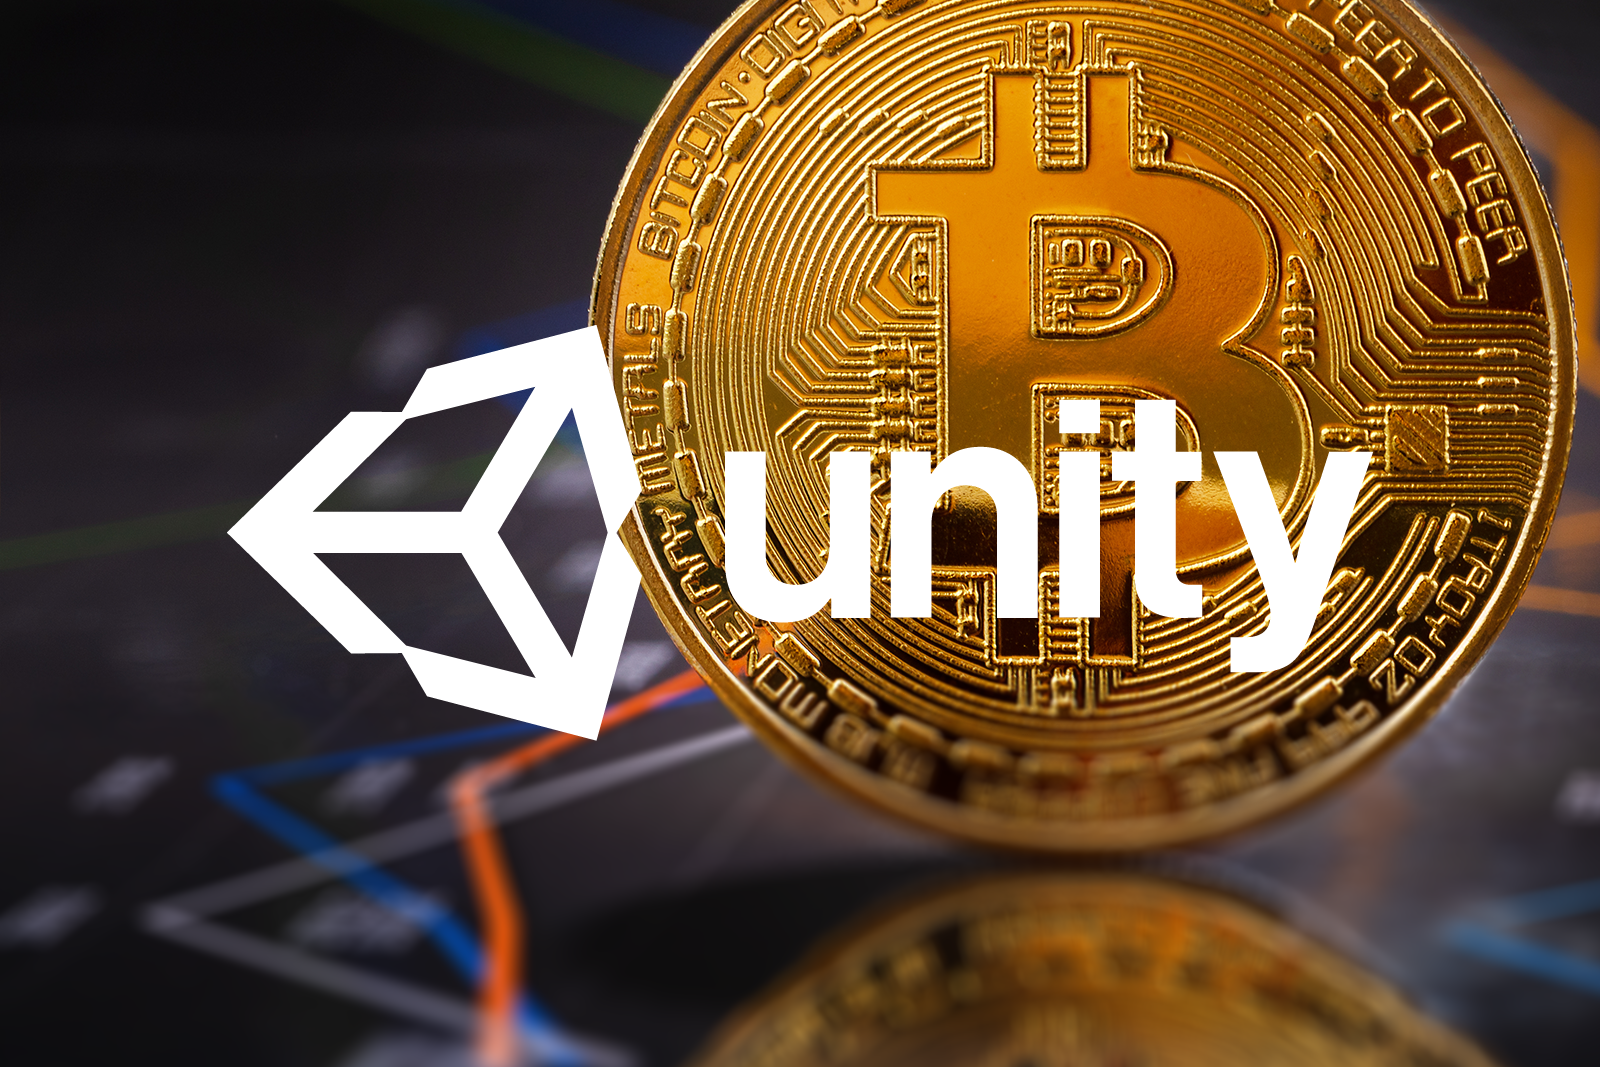 Unity reveals Patent for a Blockchain-Based token system